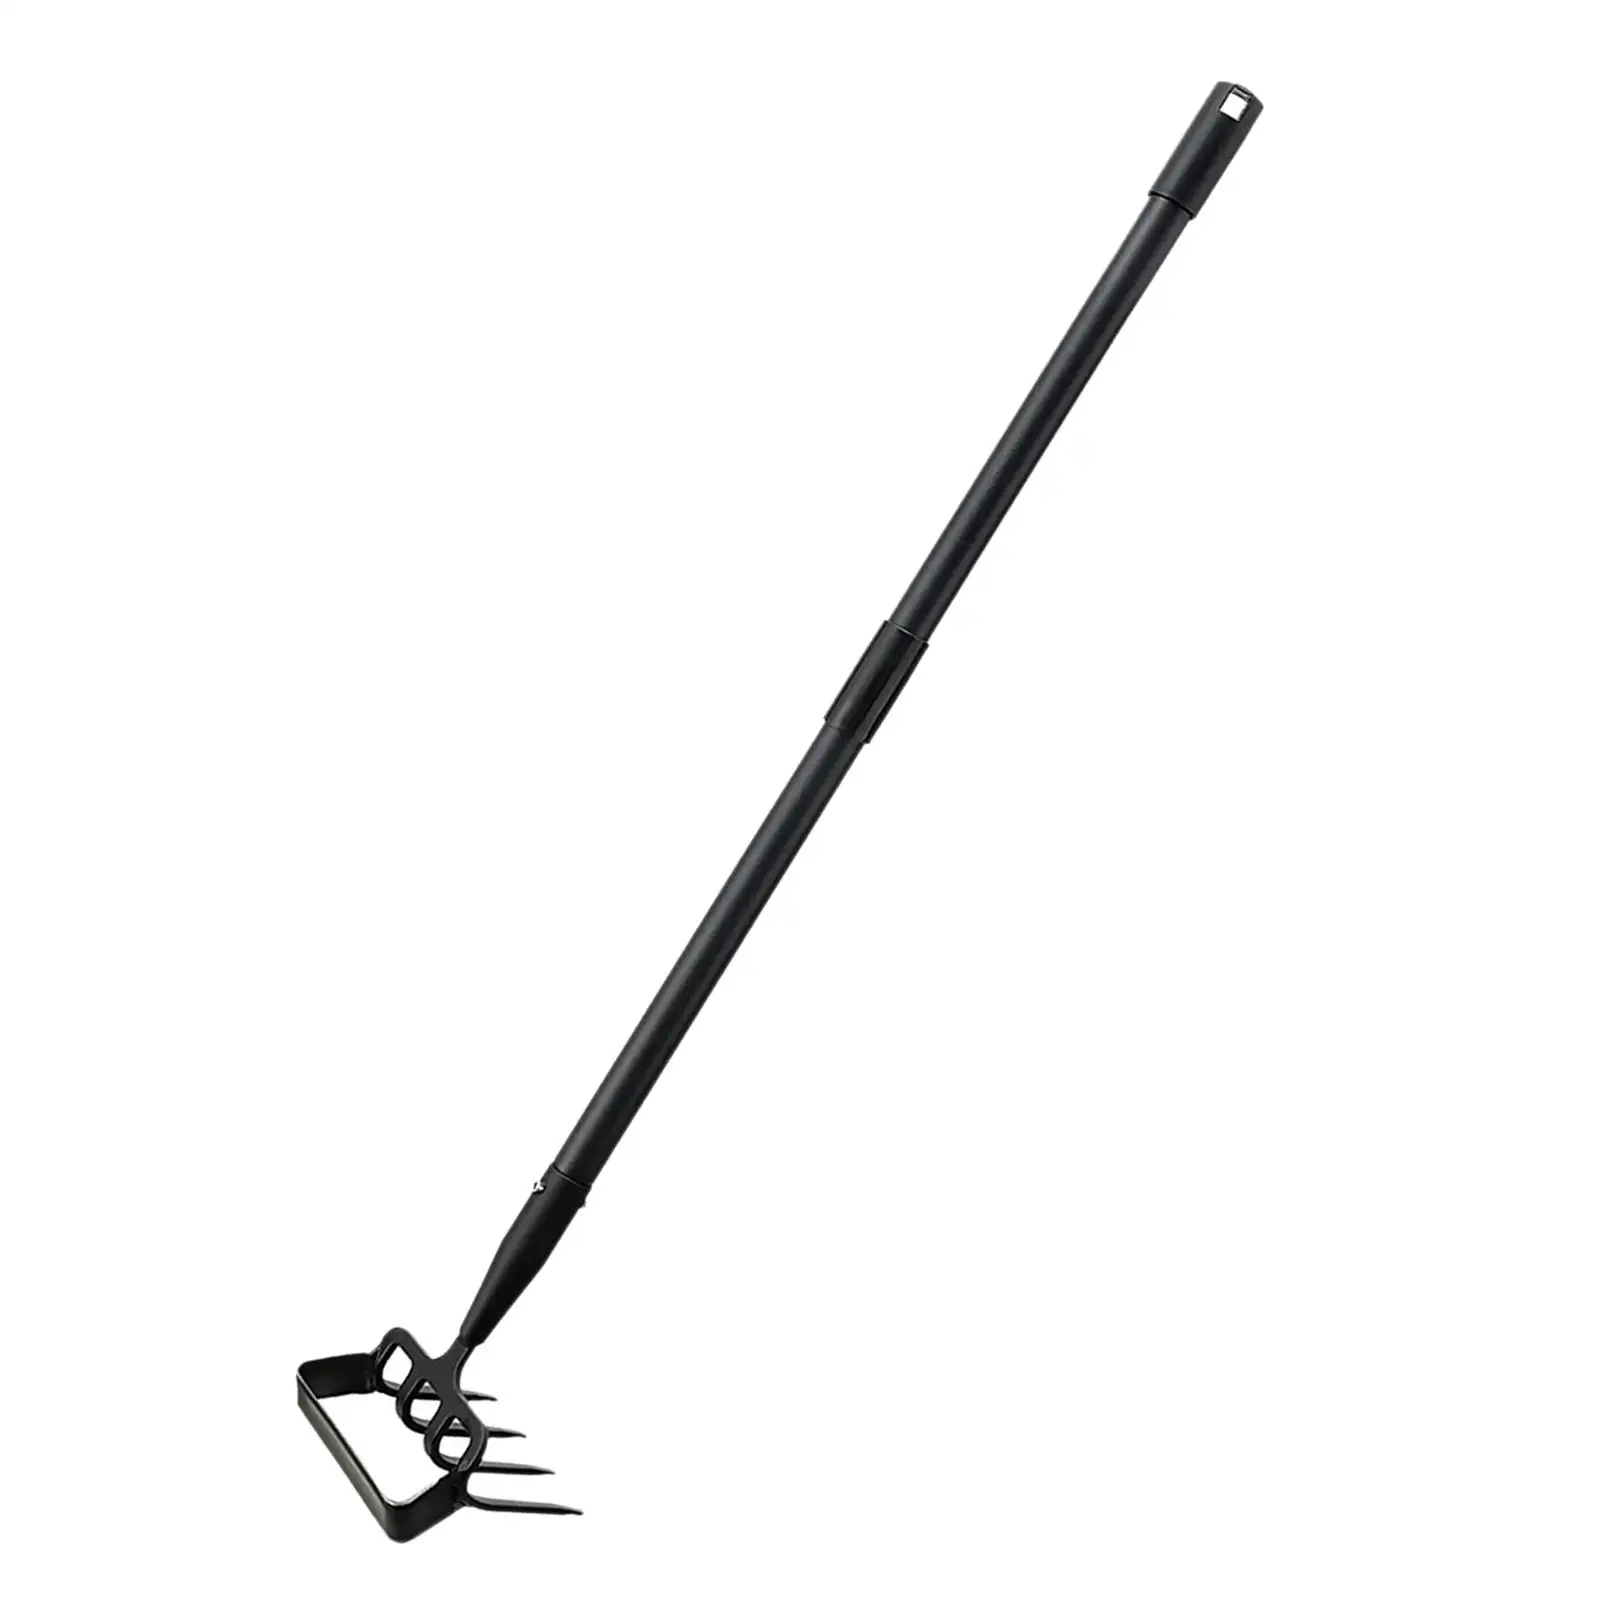 Stirrup Hoe and Cultivator Portable Dual Purpose Long Handle Garden Tool for Planting Loosening Digging Cultivating Women Men